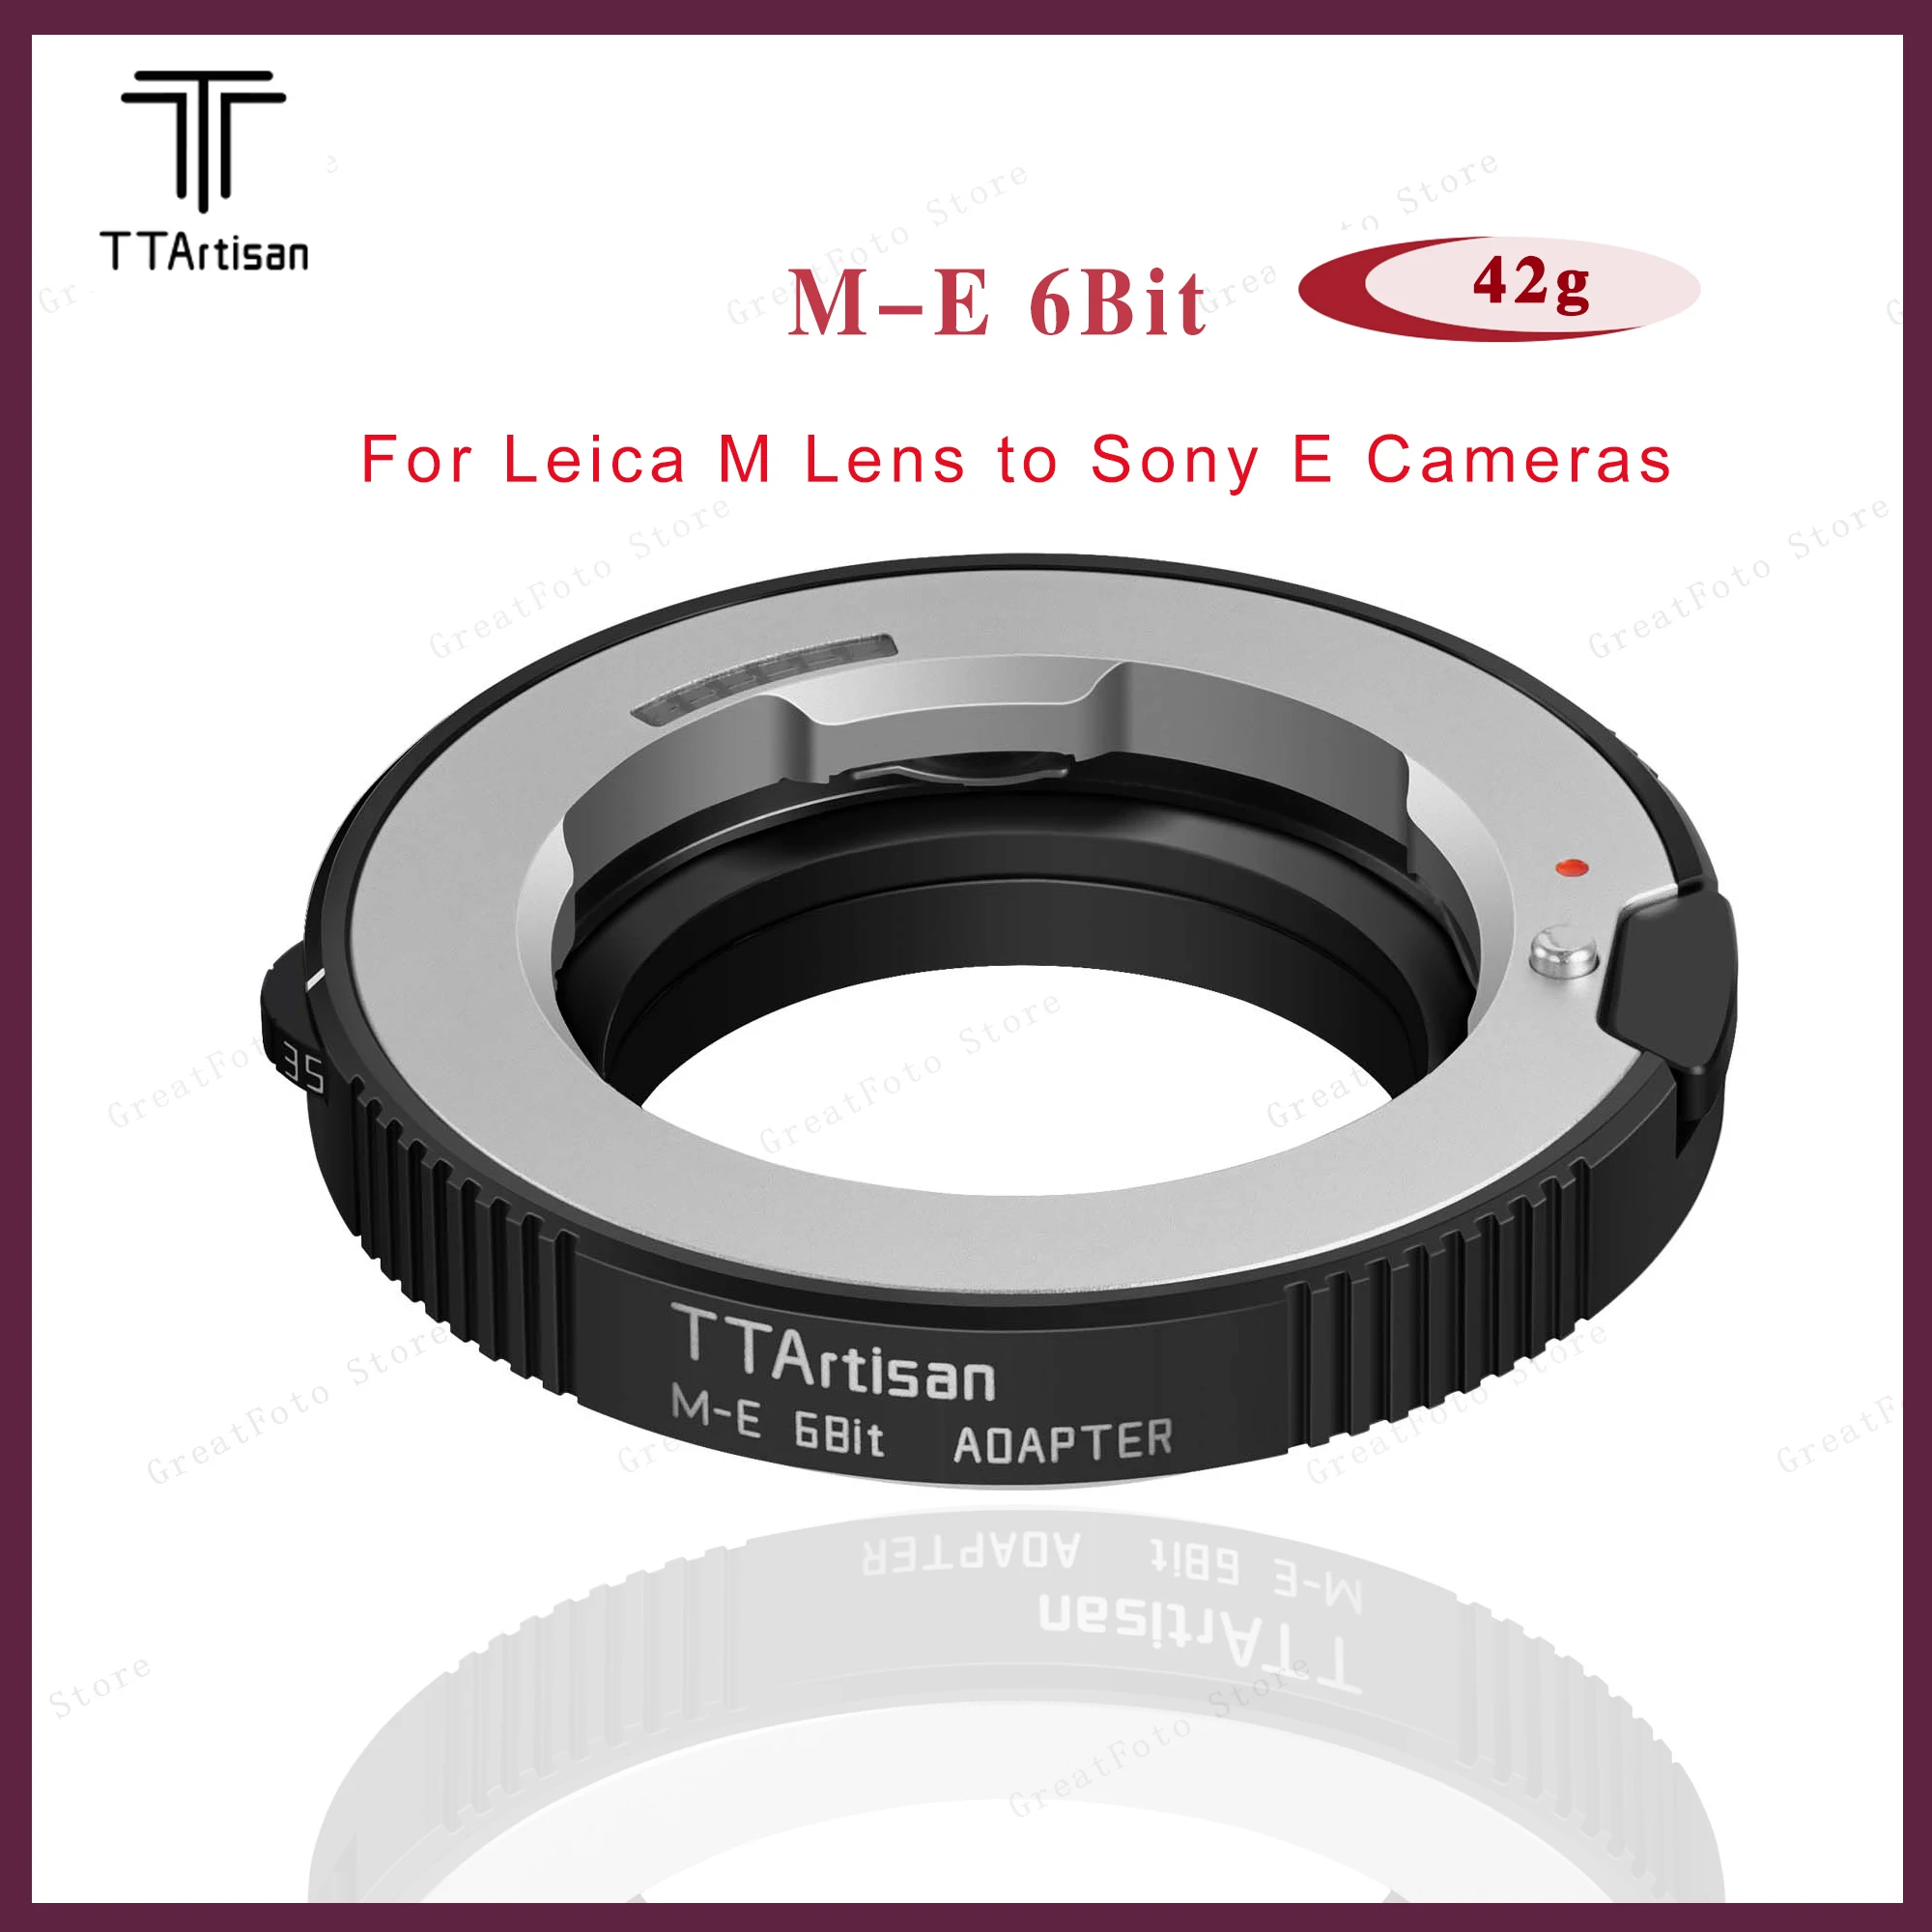 

TTartisan M-E 6Bit Adapter Ring For Leica M Lens to Sony E Camera Support Turn On Body Image Stabilization and Exif Transmission